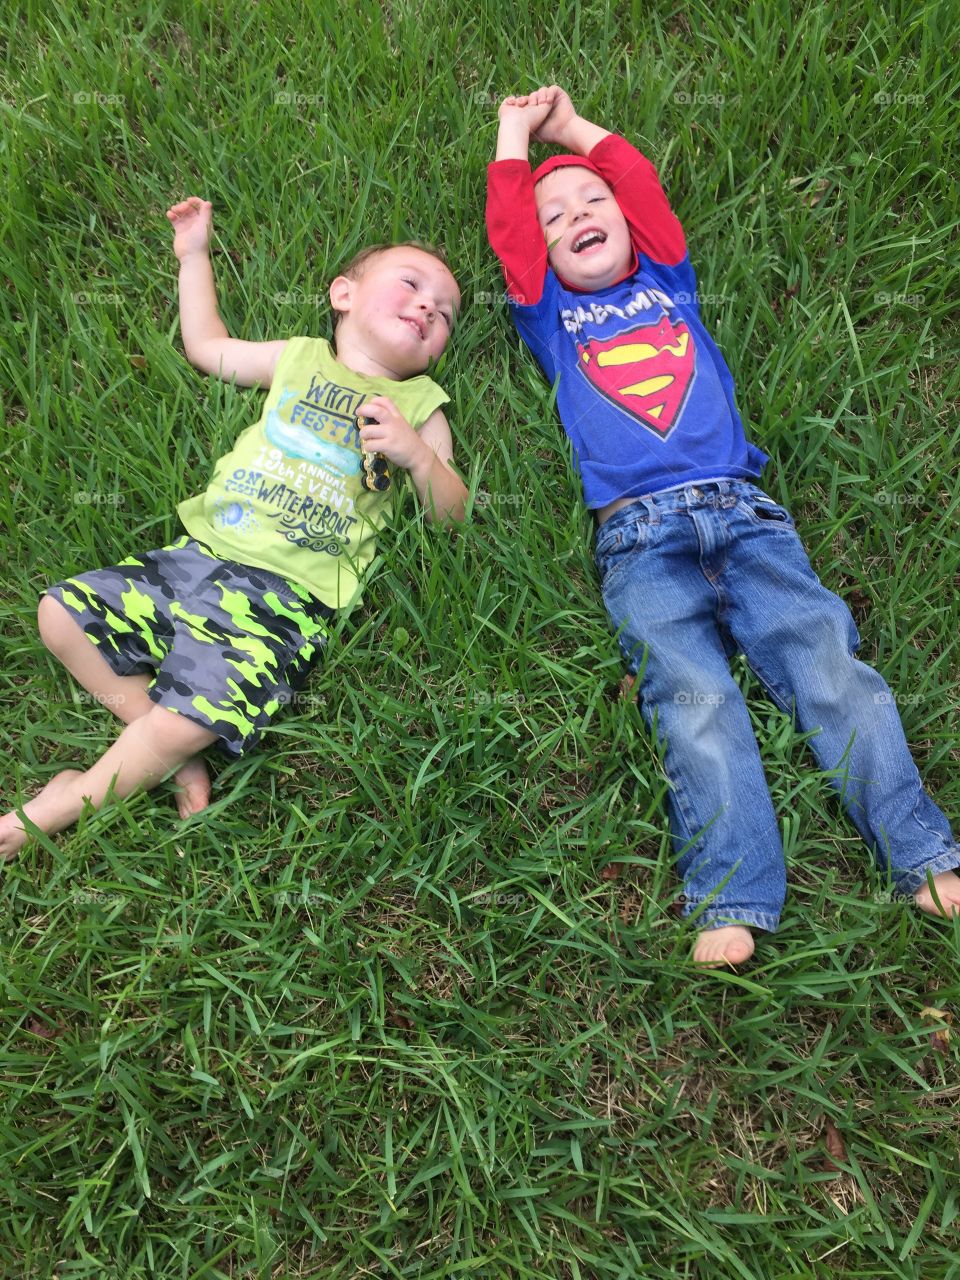 Boys having fun playing in the grass in the front yard